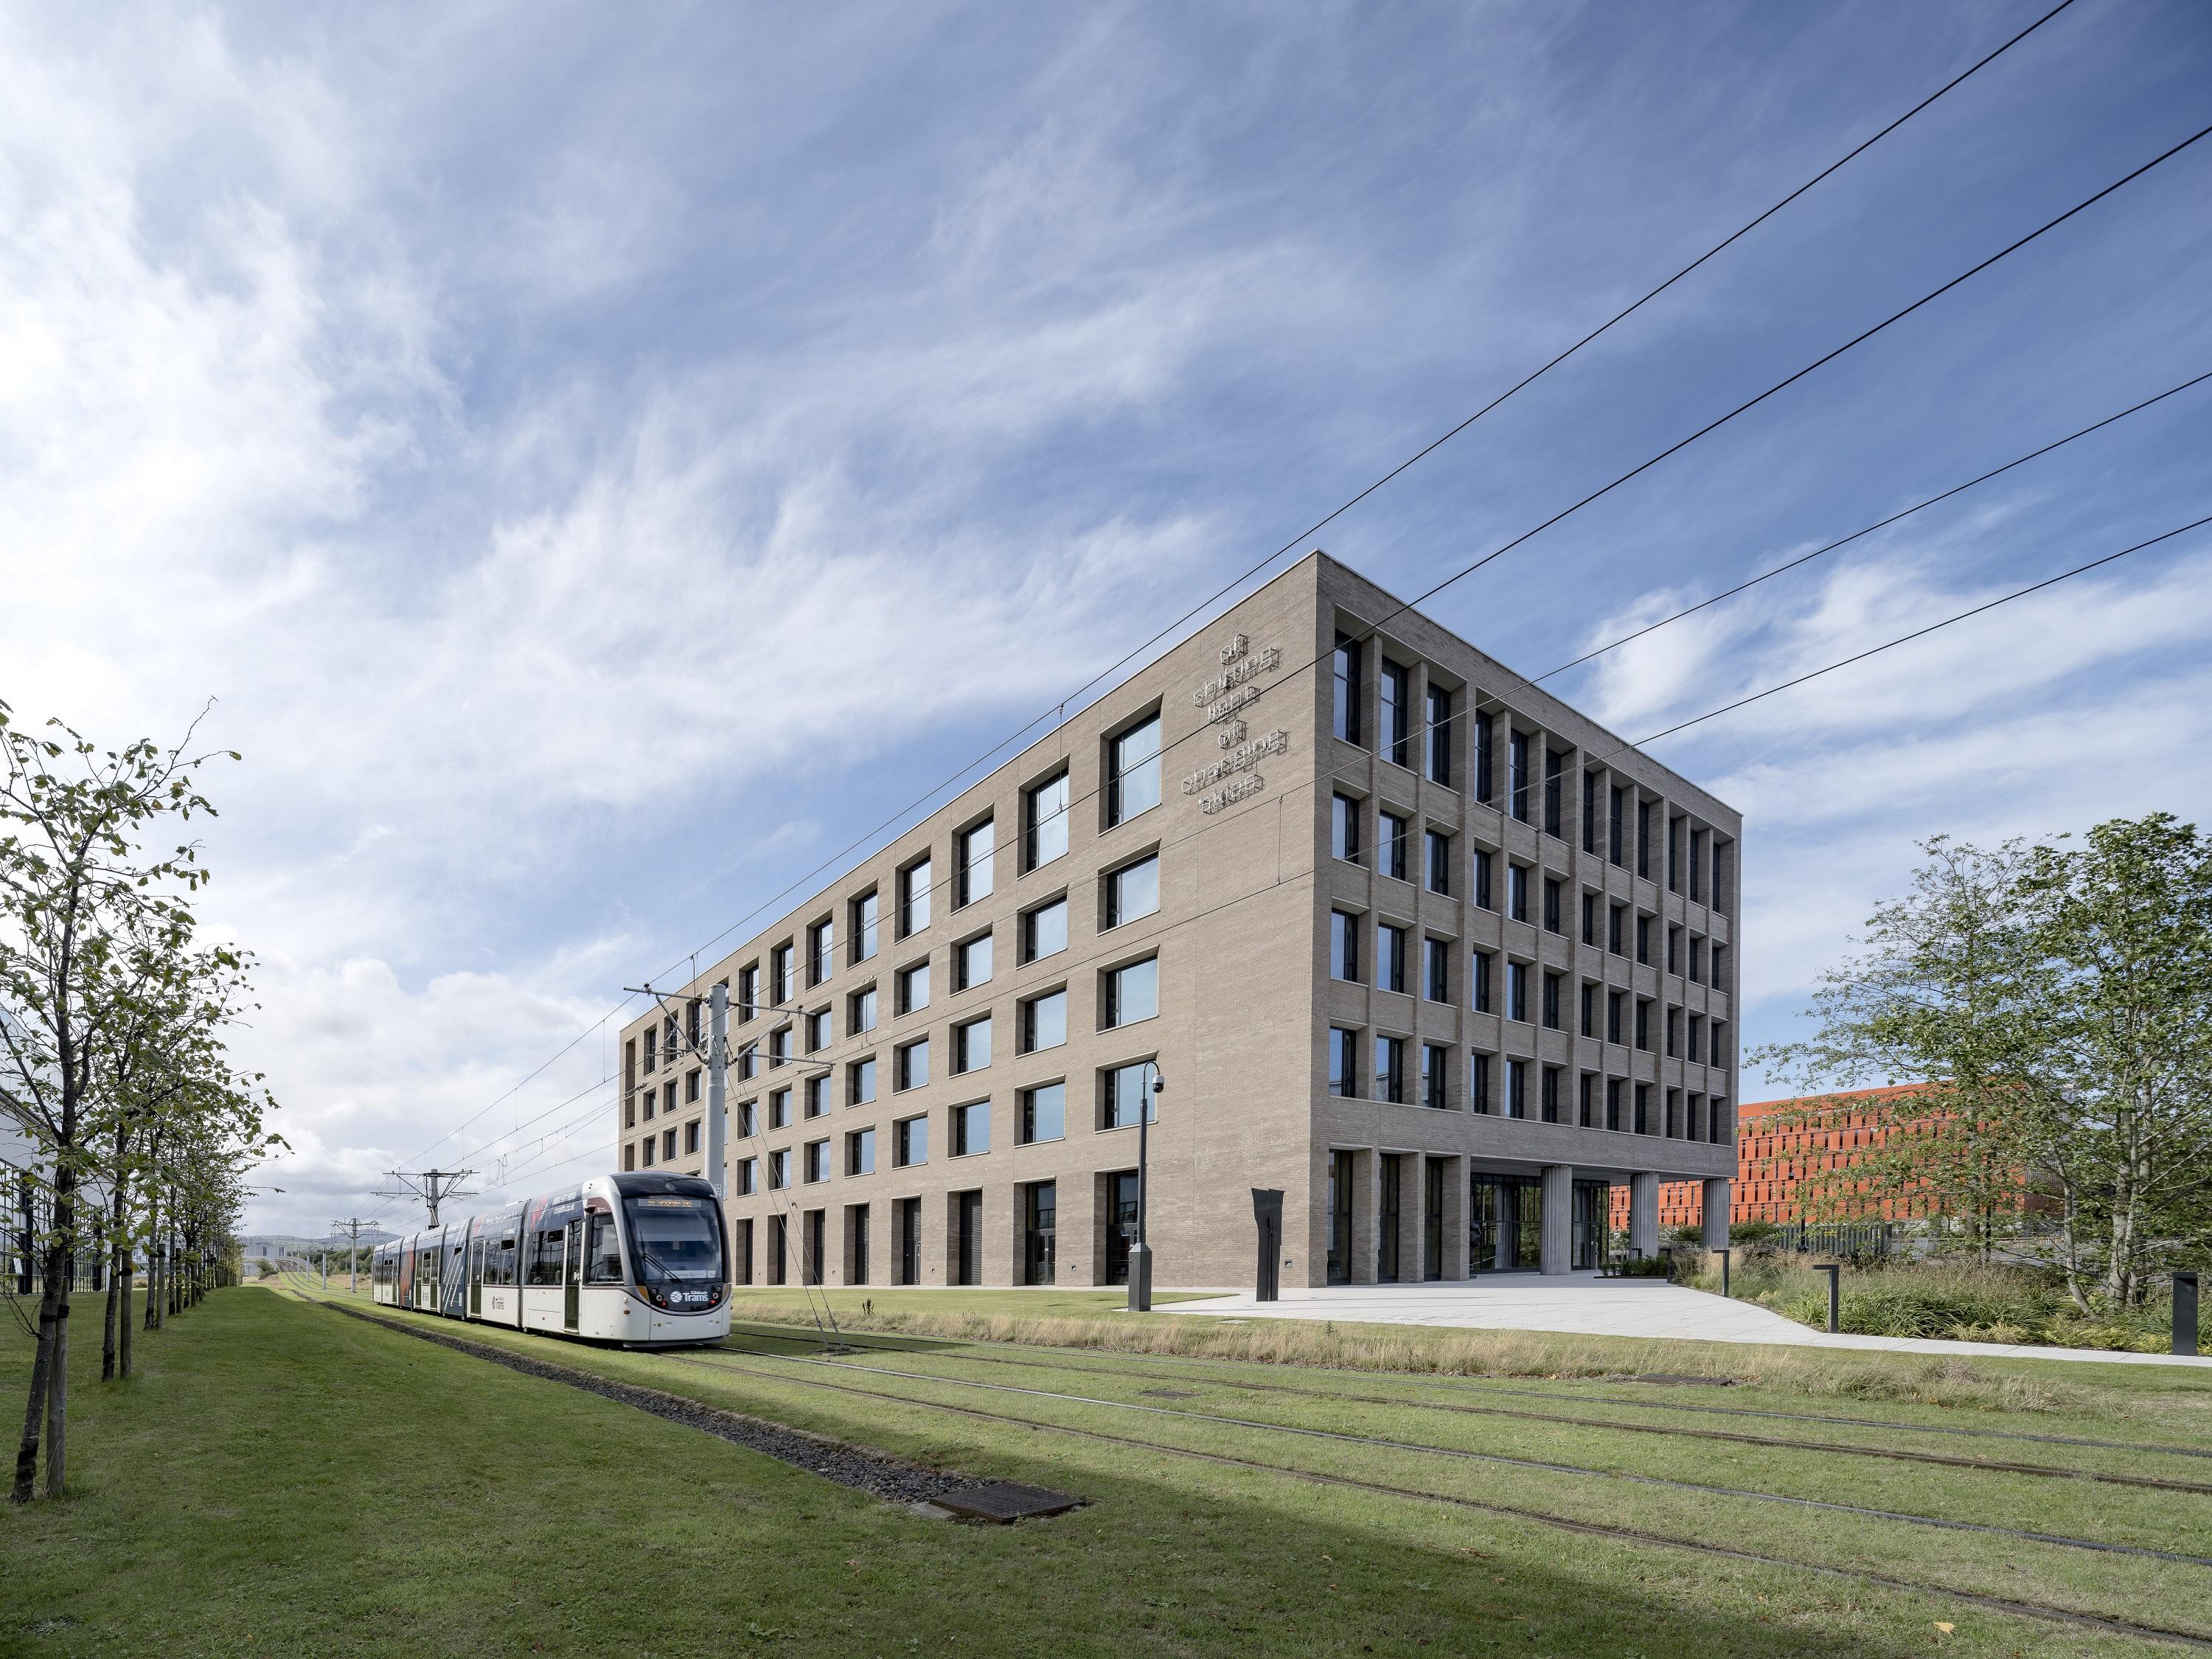 A photograph of the 1 New Park Square office building in west Edinburgh.